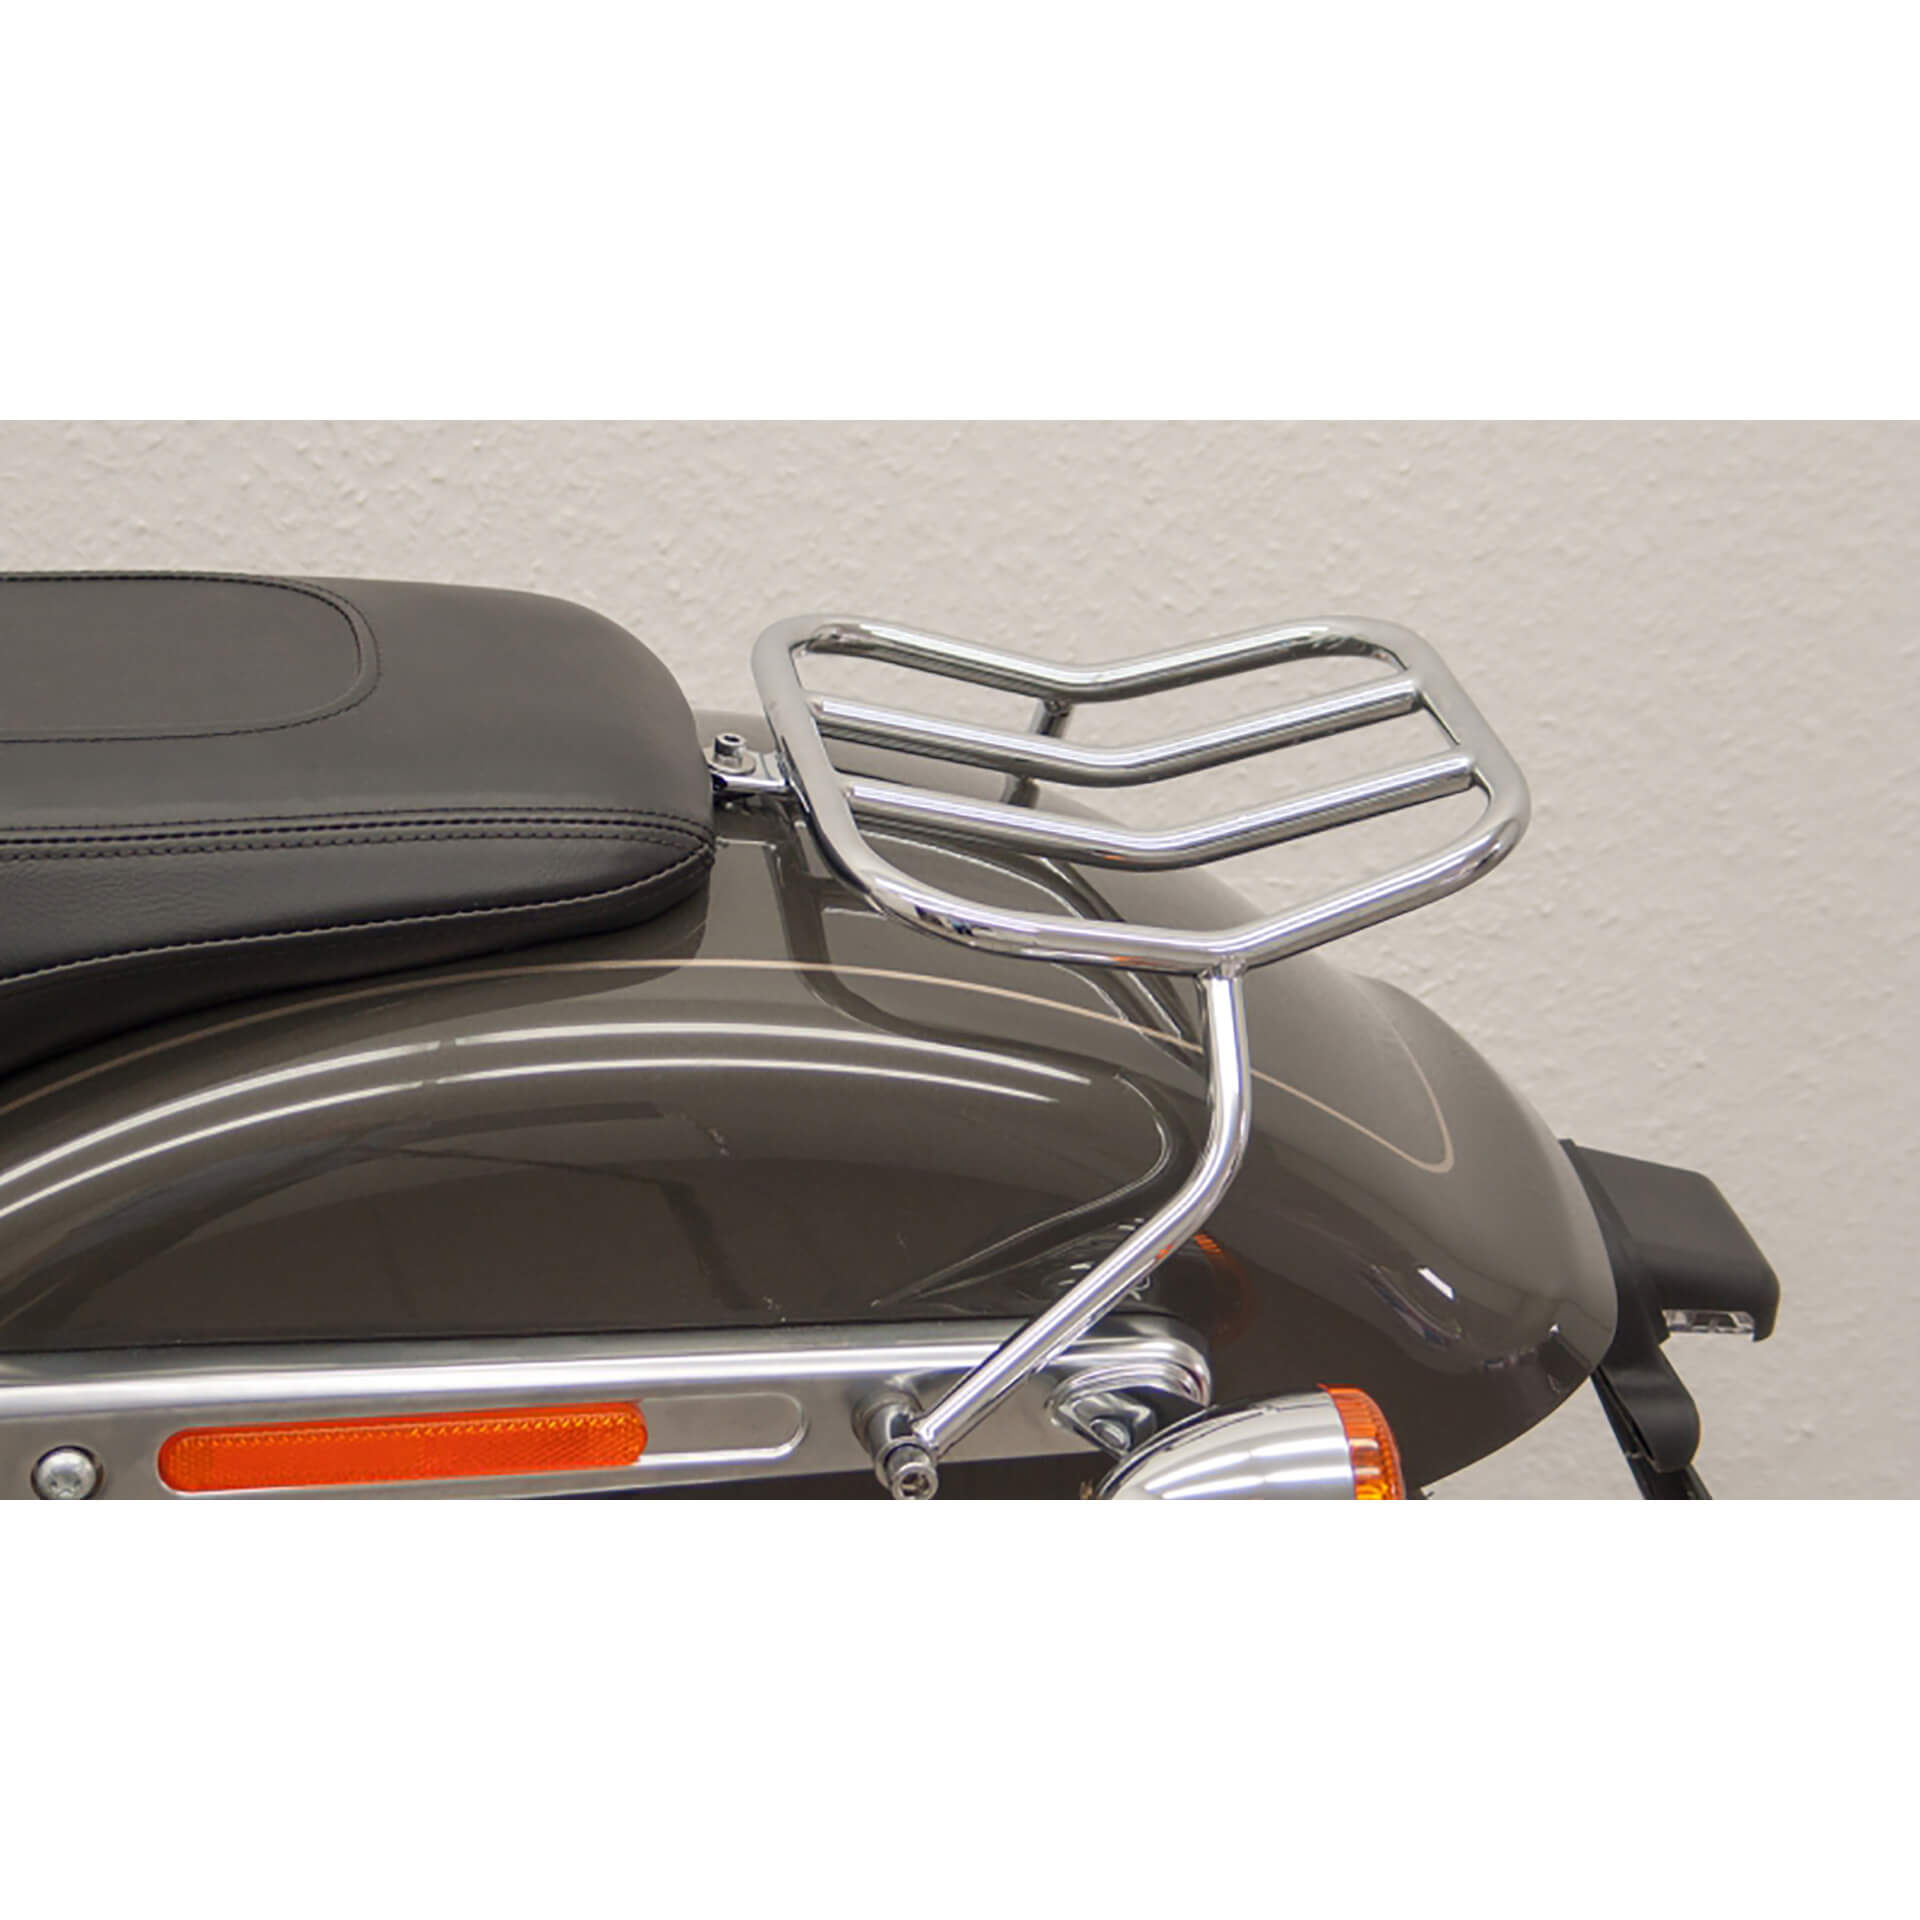 fehling Rearrack carrier, H-D Softail Deluxe/Softail Heritage Classic/Softail Fat Boy/Breakout